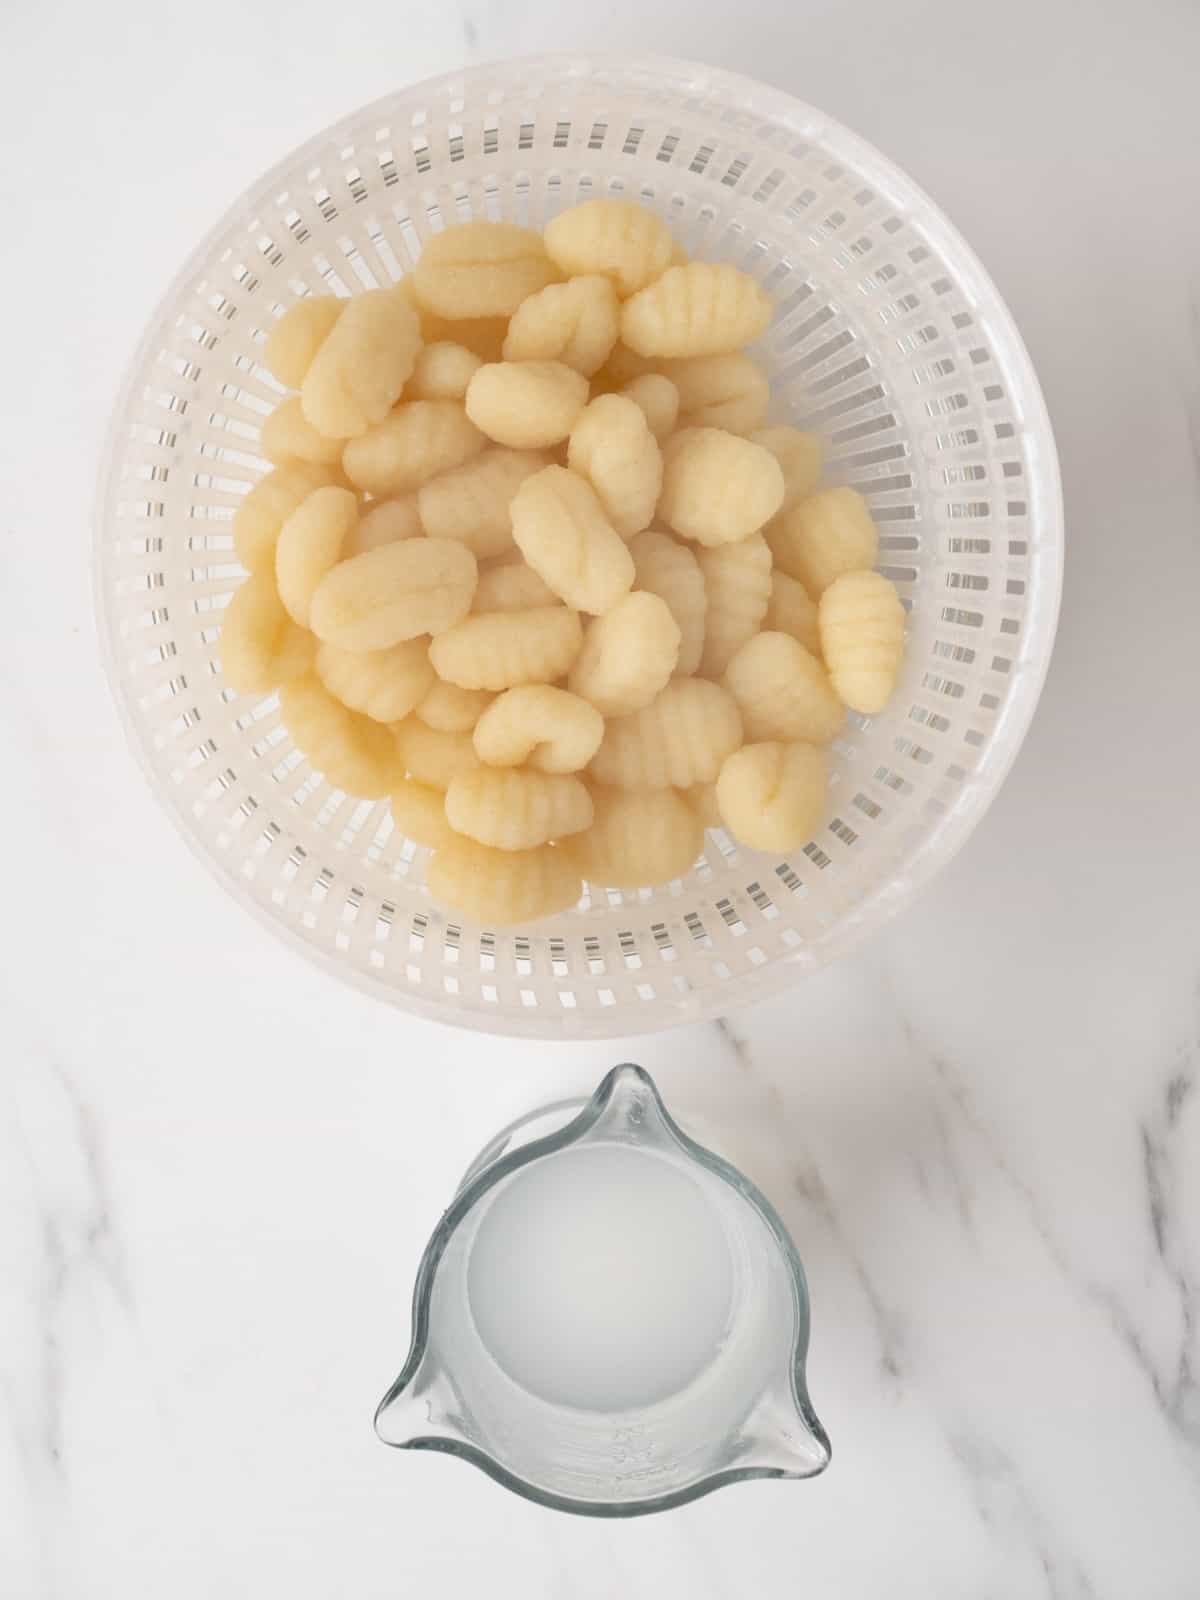 A colander with cooked gnocchi along with a measuring cup with the reserved starchy pasta water.